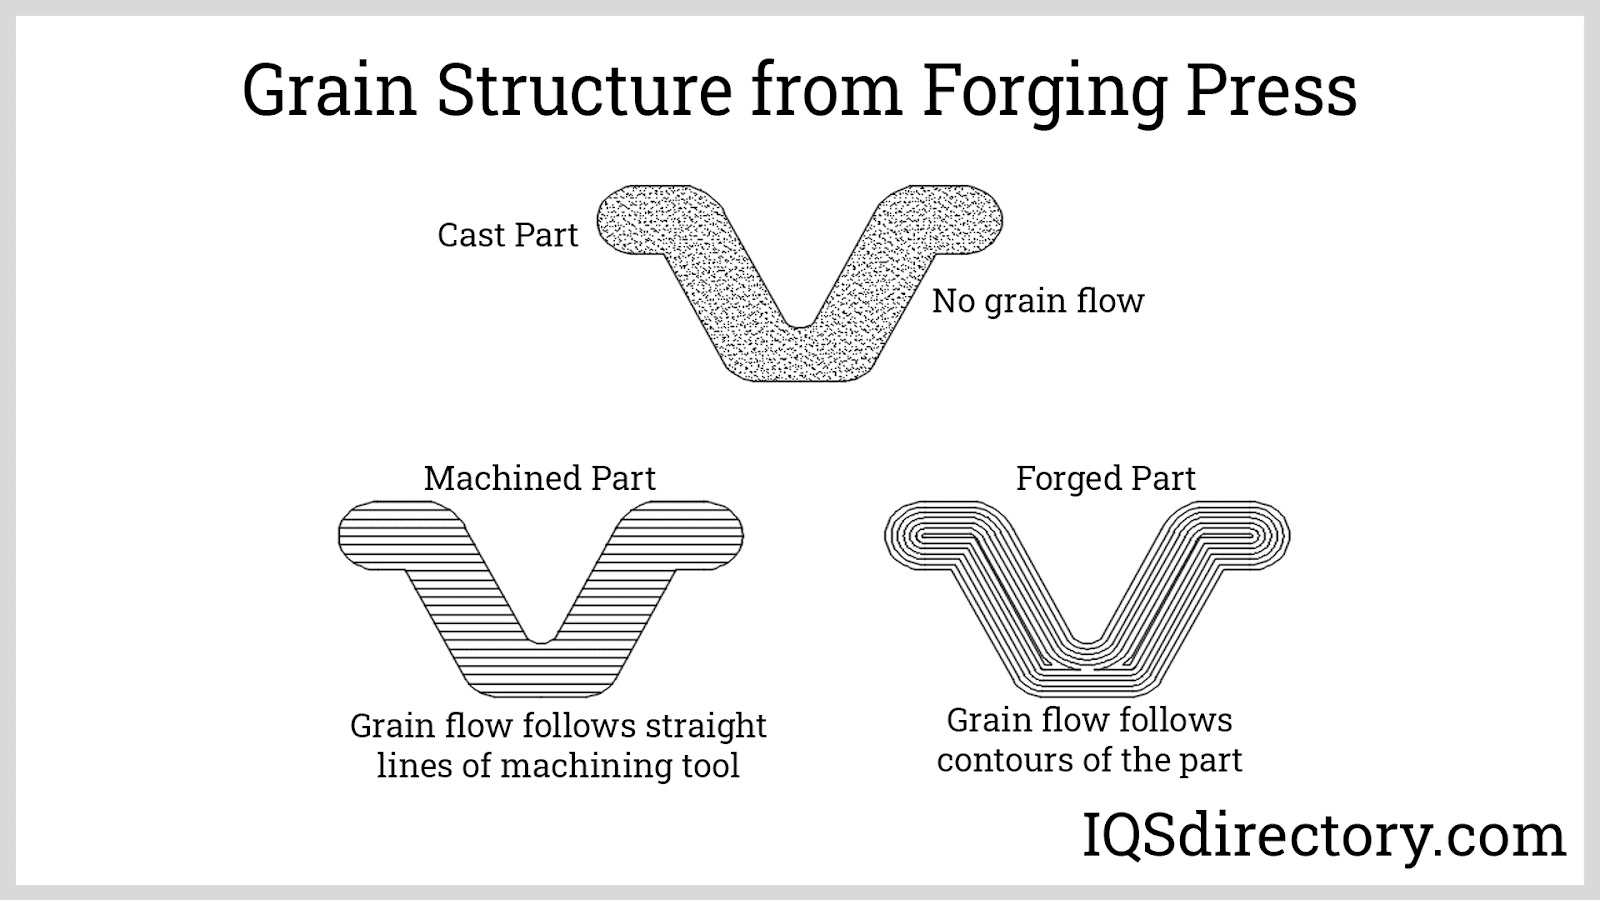 Grain Structure from Forging Press